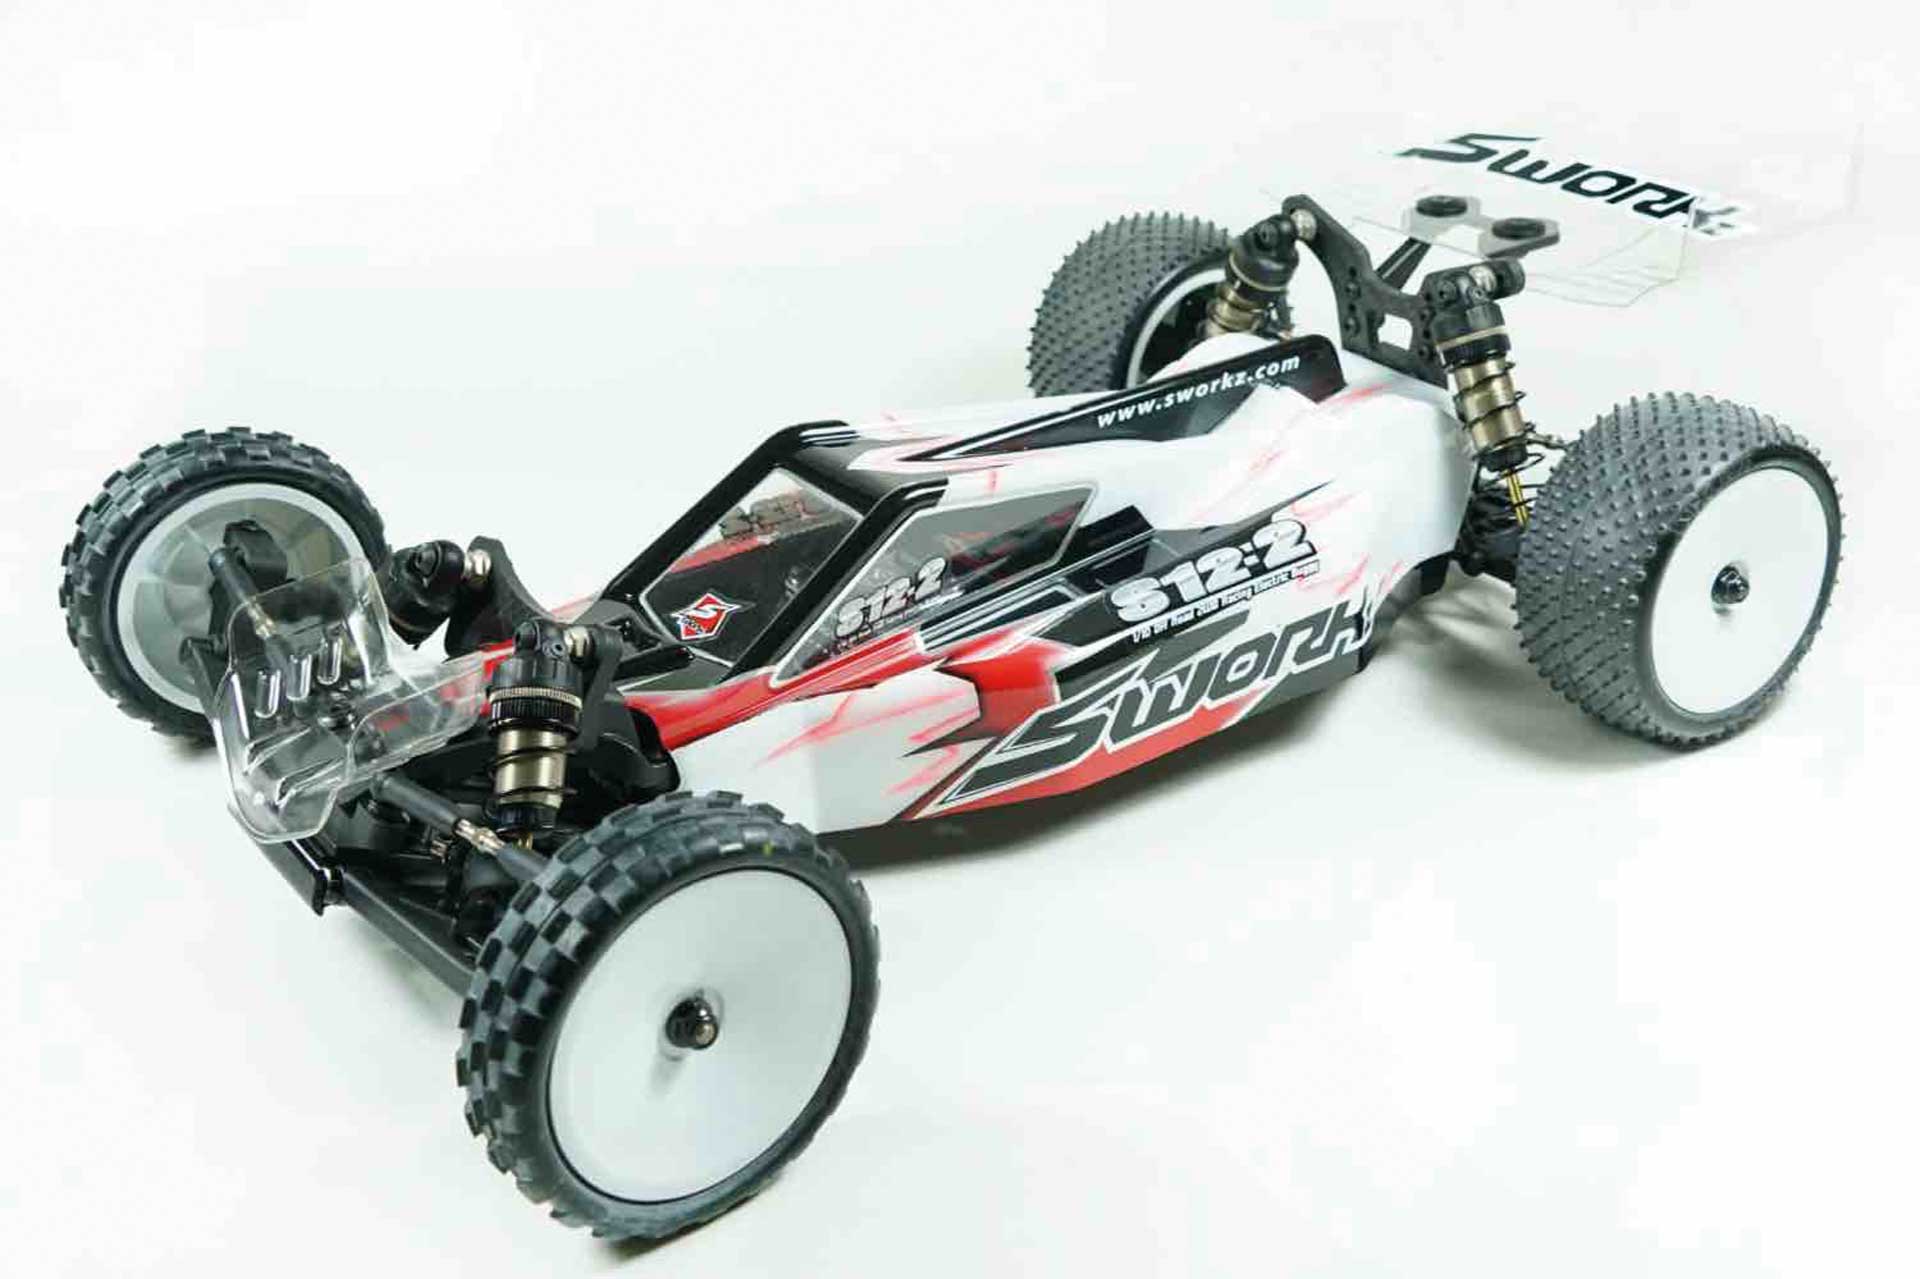 SWORKZ S12-2M(CARPET EDITION) 1/10 2WD EP OFF ROAD RACING BUGGY PRO KIT